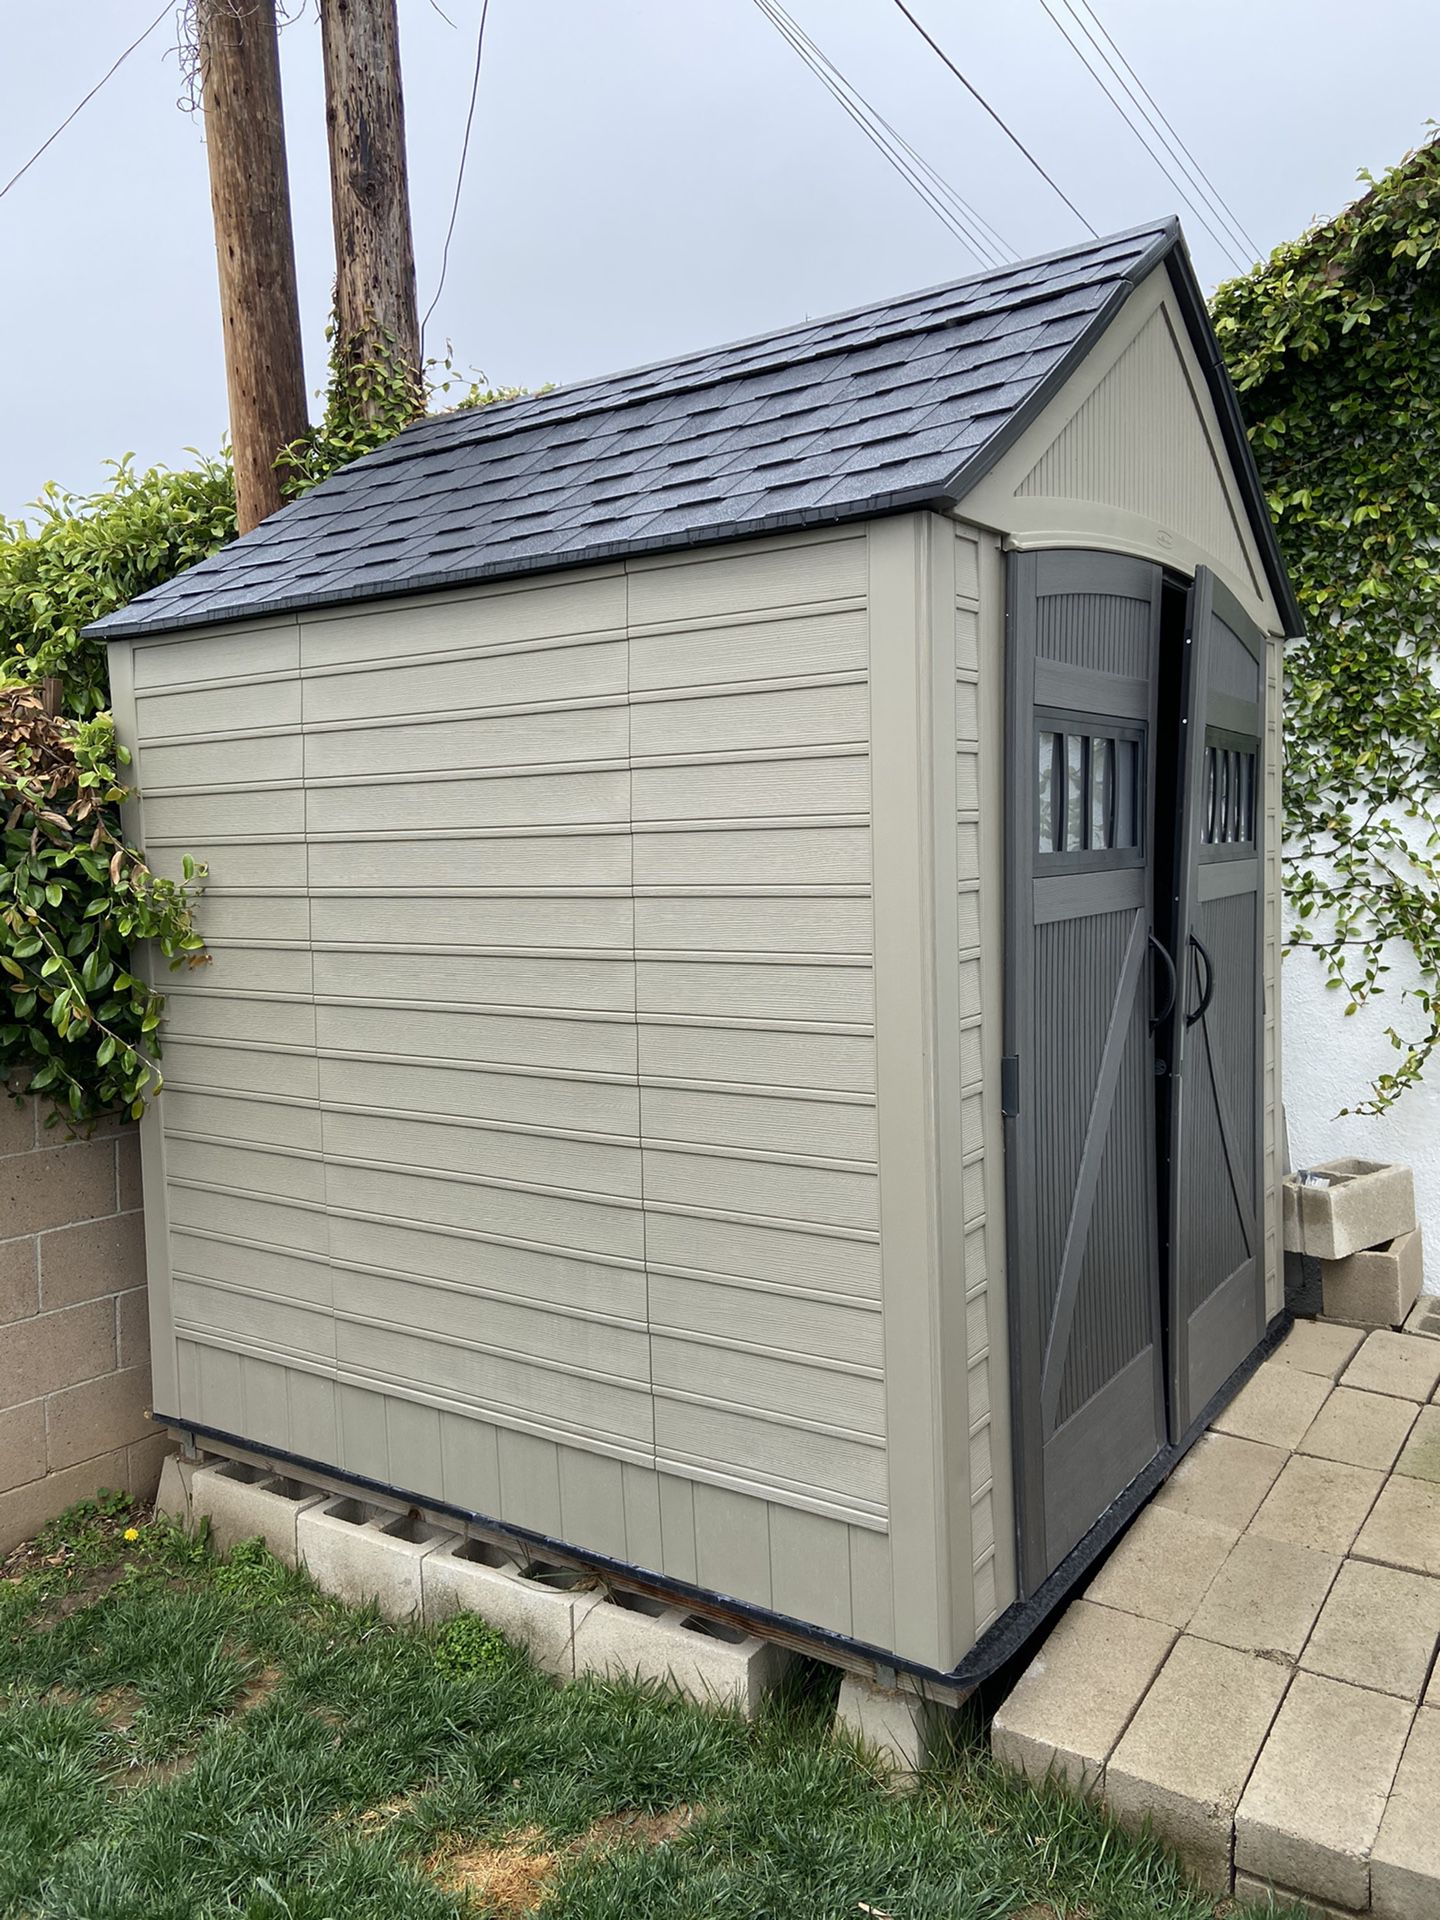 Rubbermaid 7’x 7’ storage shed